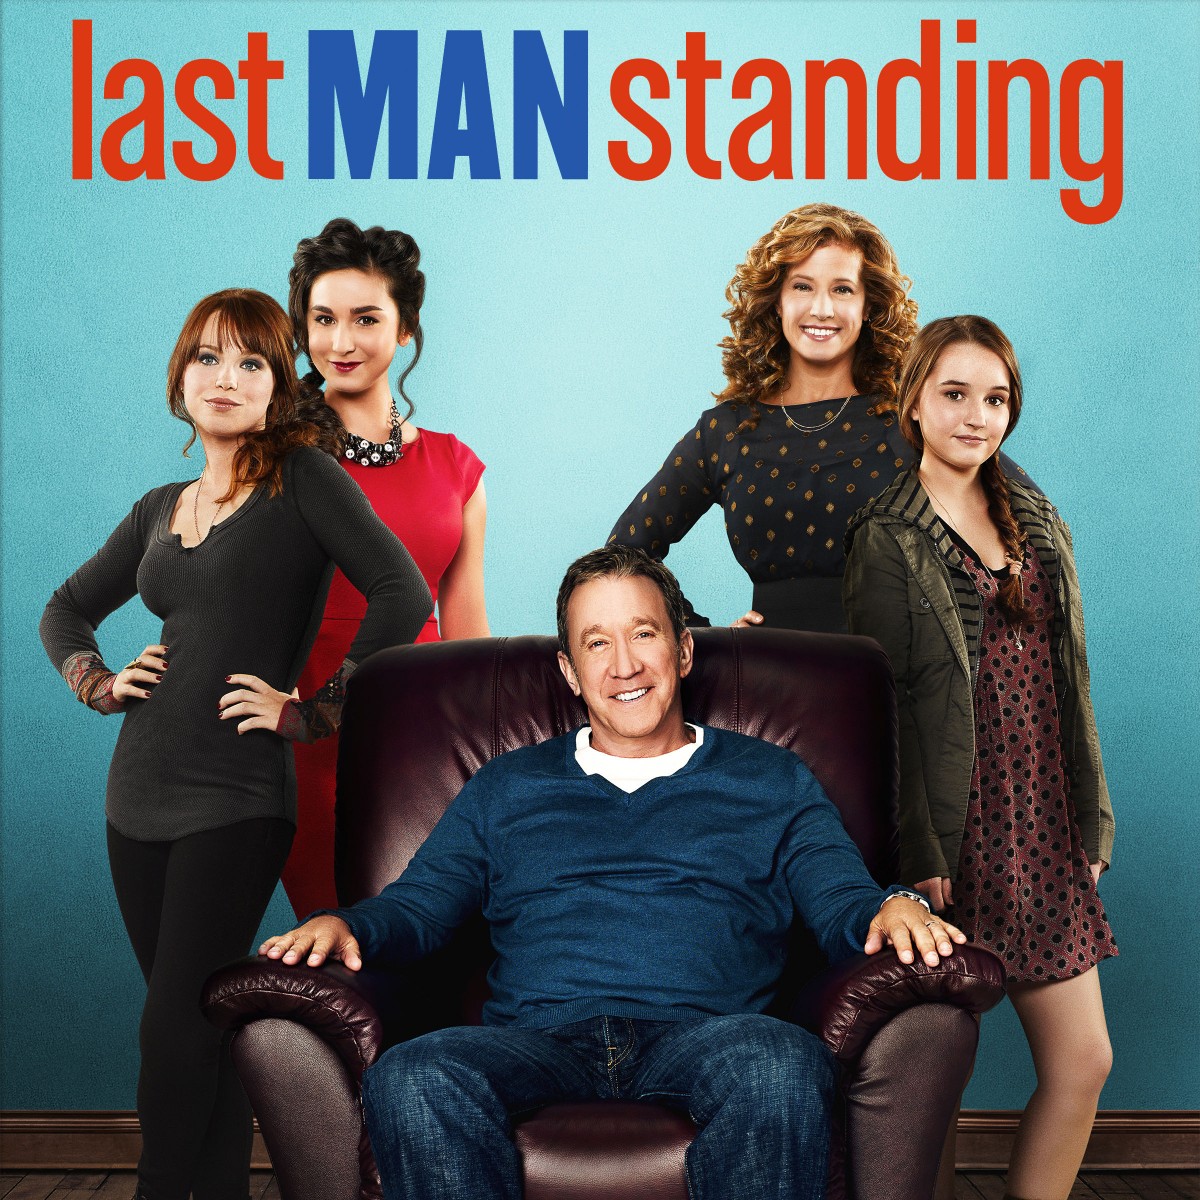 Image result for Last man standing